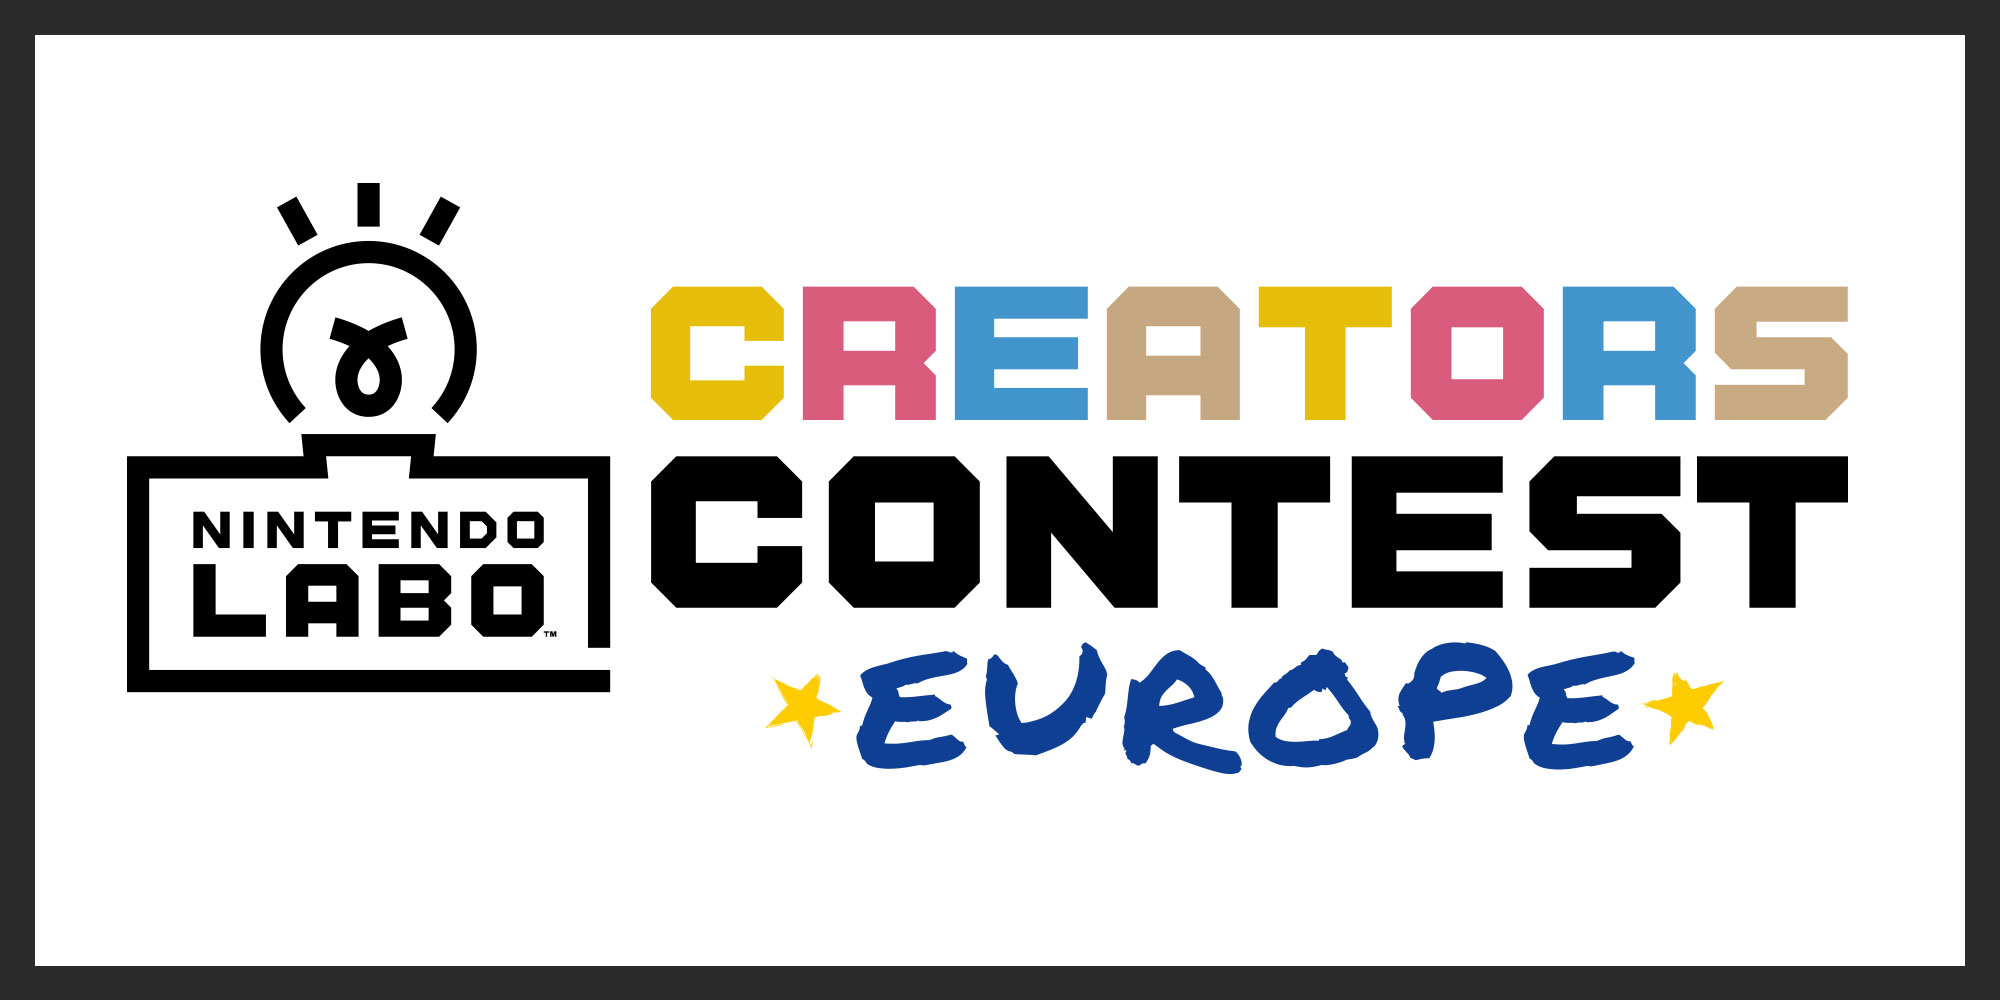 Introducing the Nintendo Labo Creators Contest for Europe!